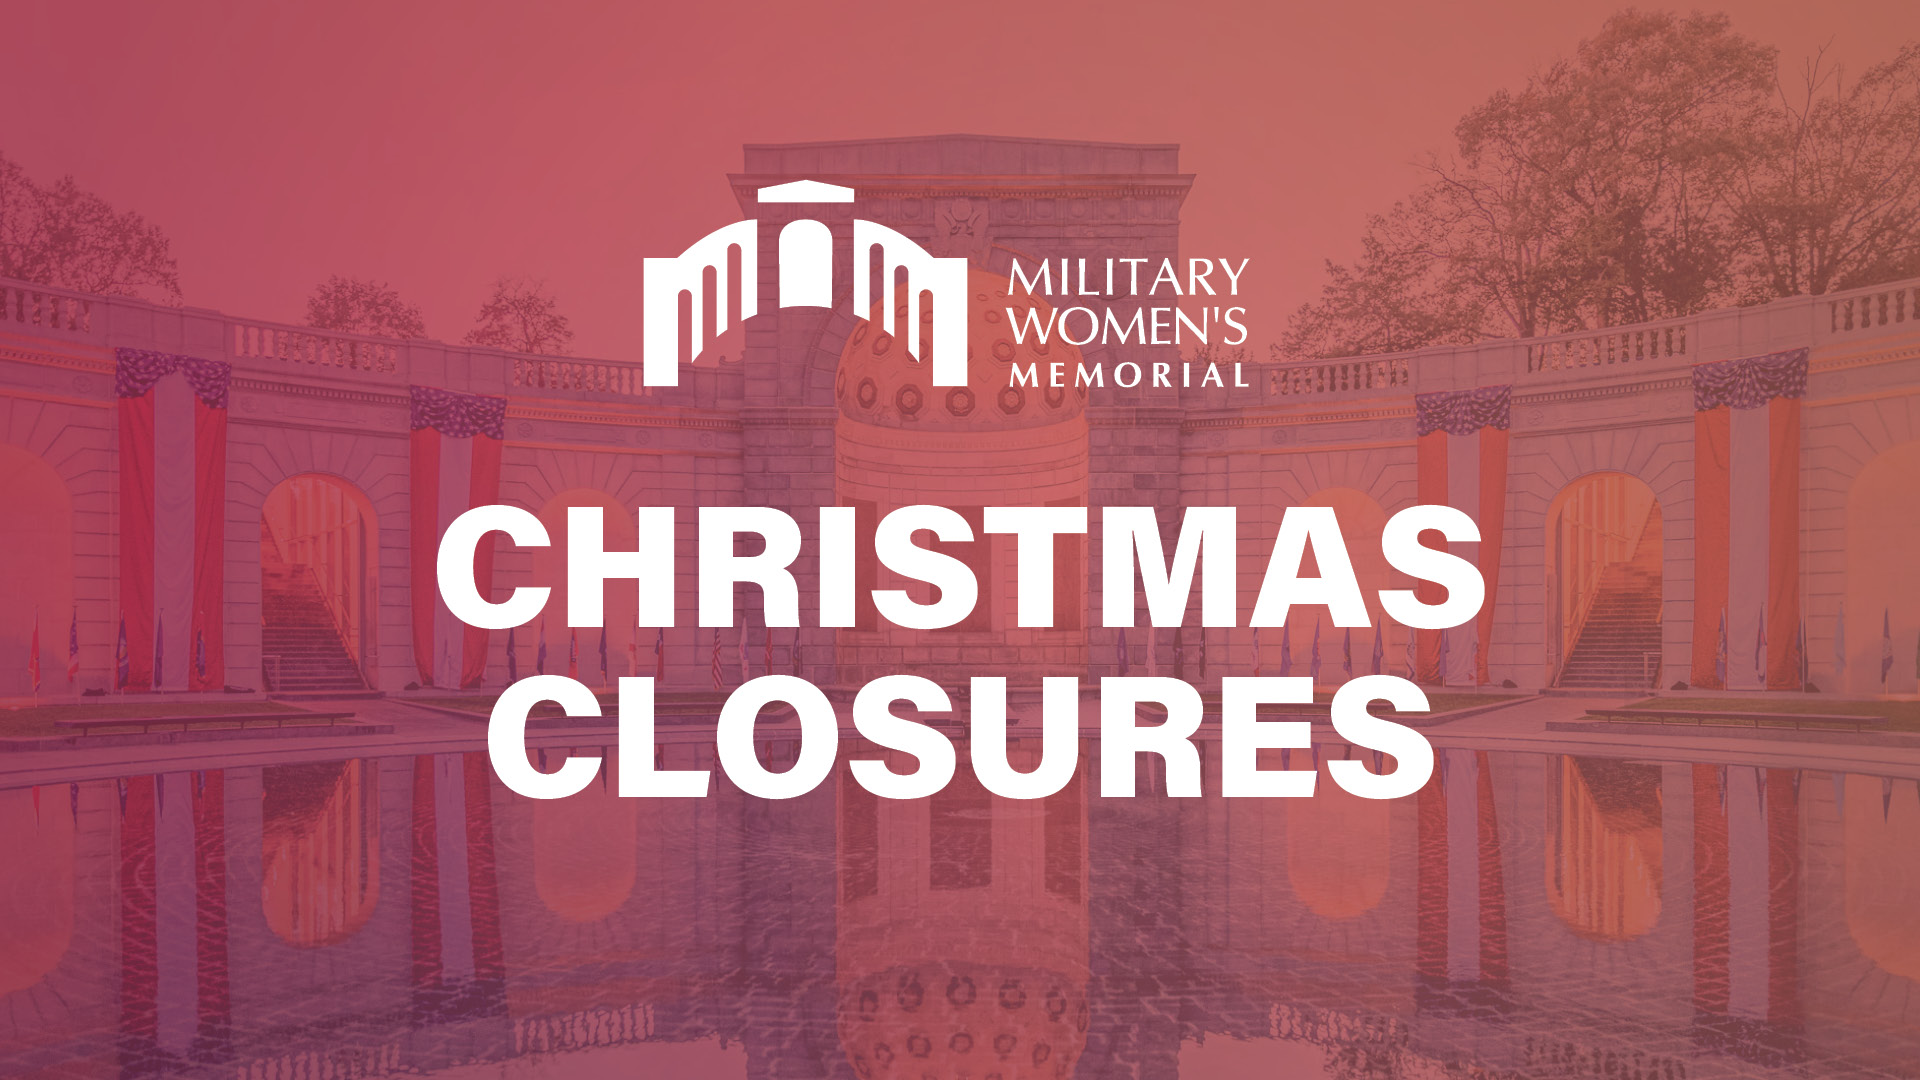 Christmas closures on a red background